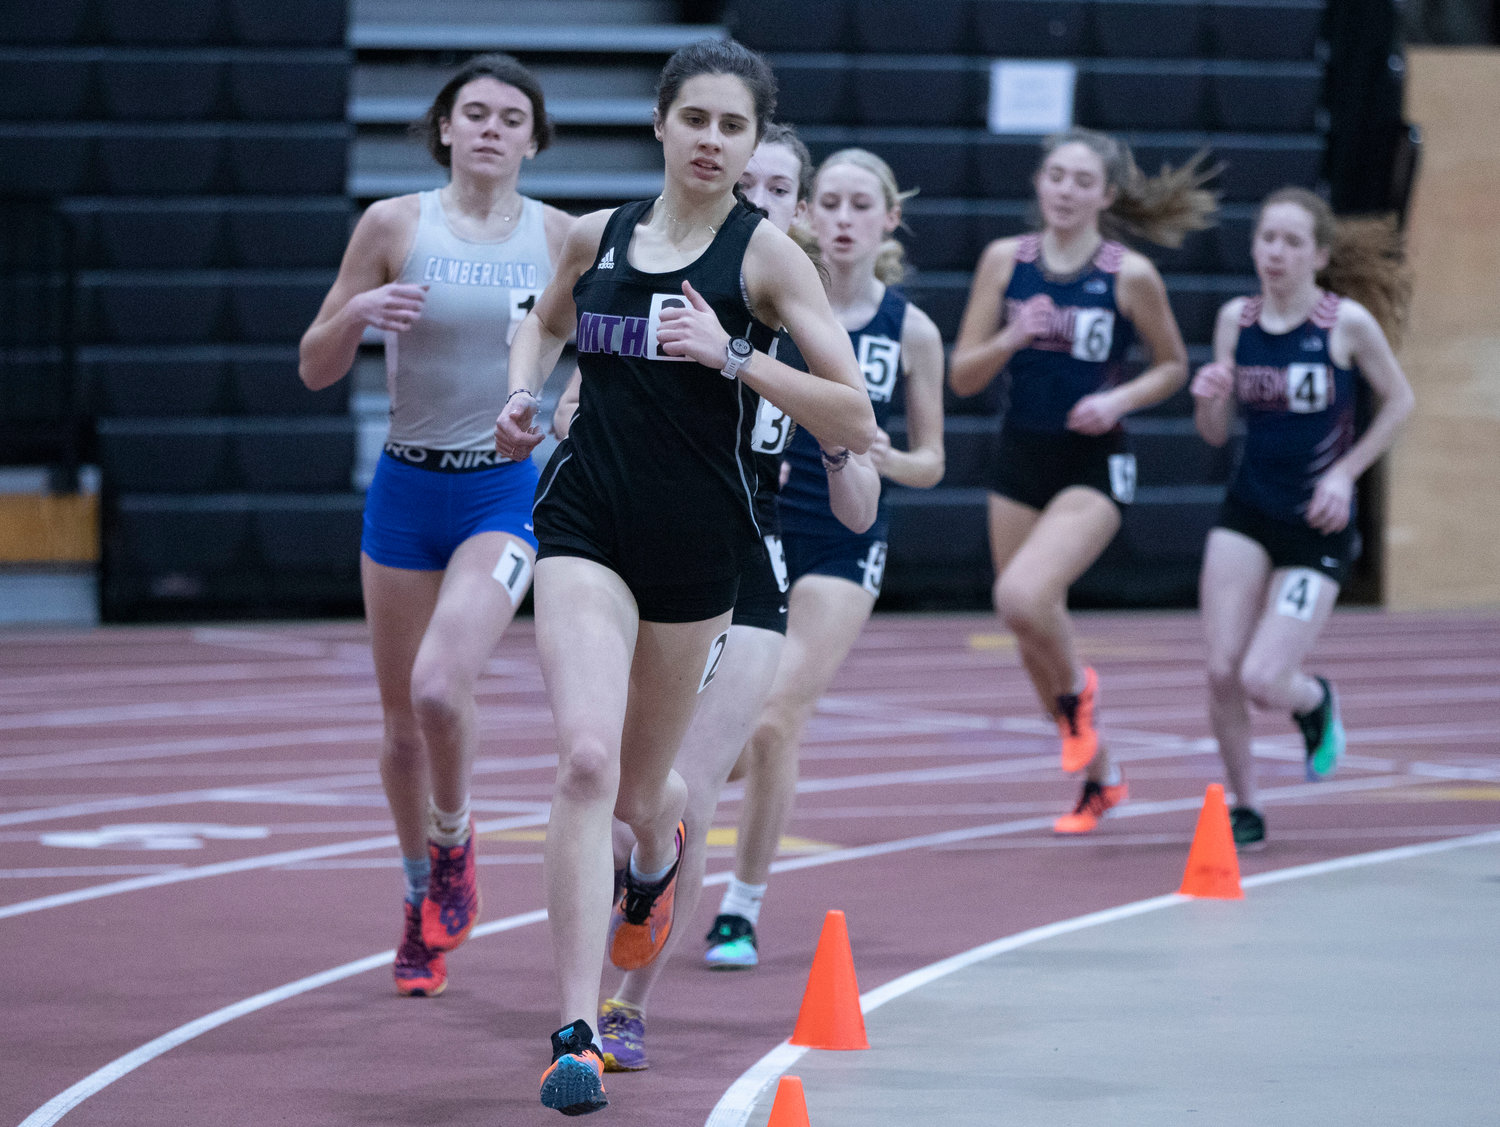 Jessica Deal scored 28 points for the Huskies, winning gold in the 3000-meter and the 1500-meter runs. She also placed second in the 1000-meter run.